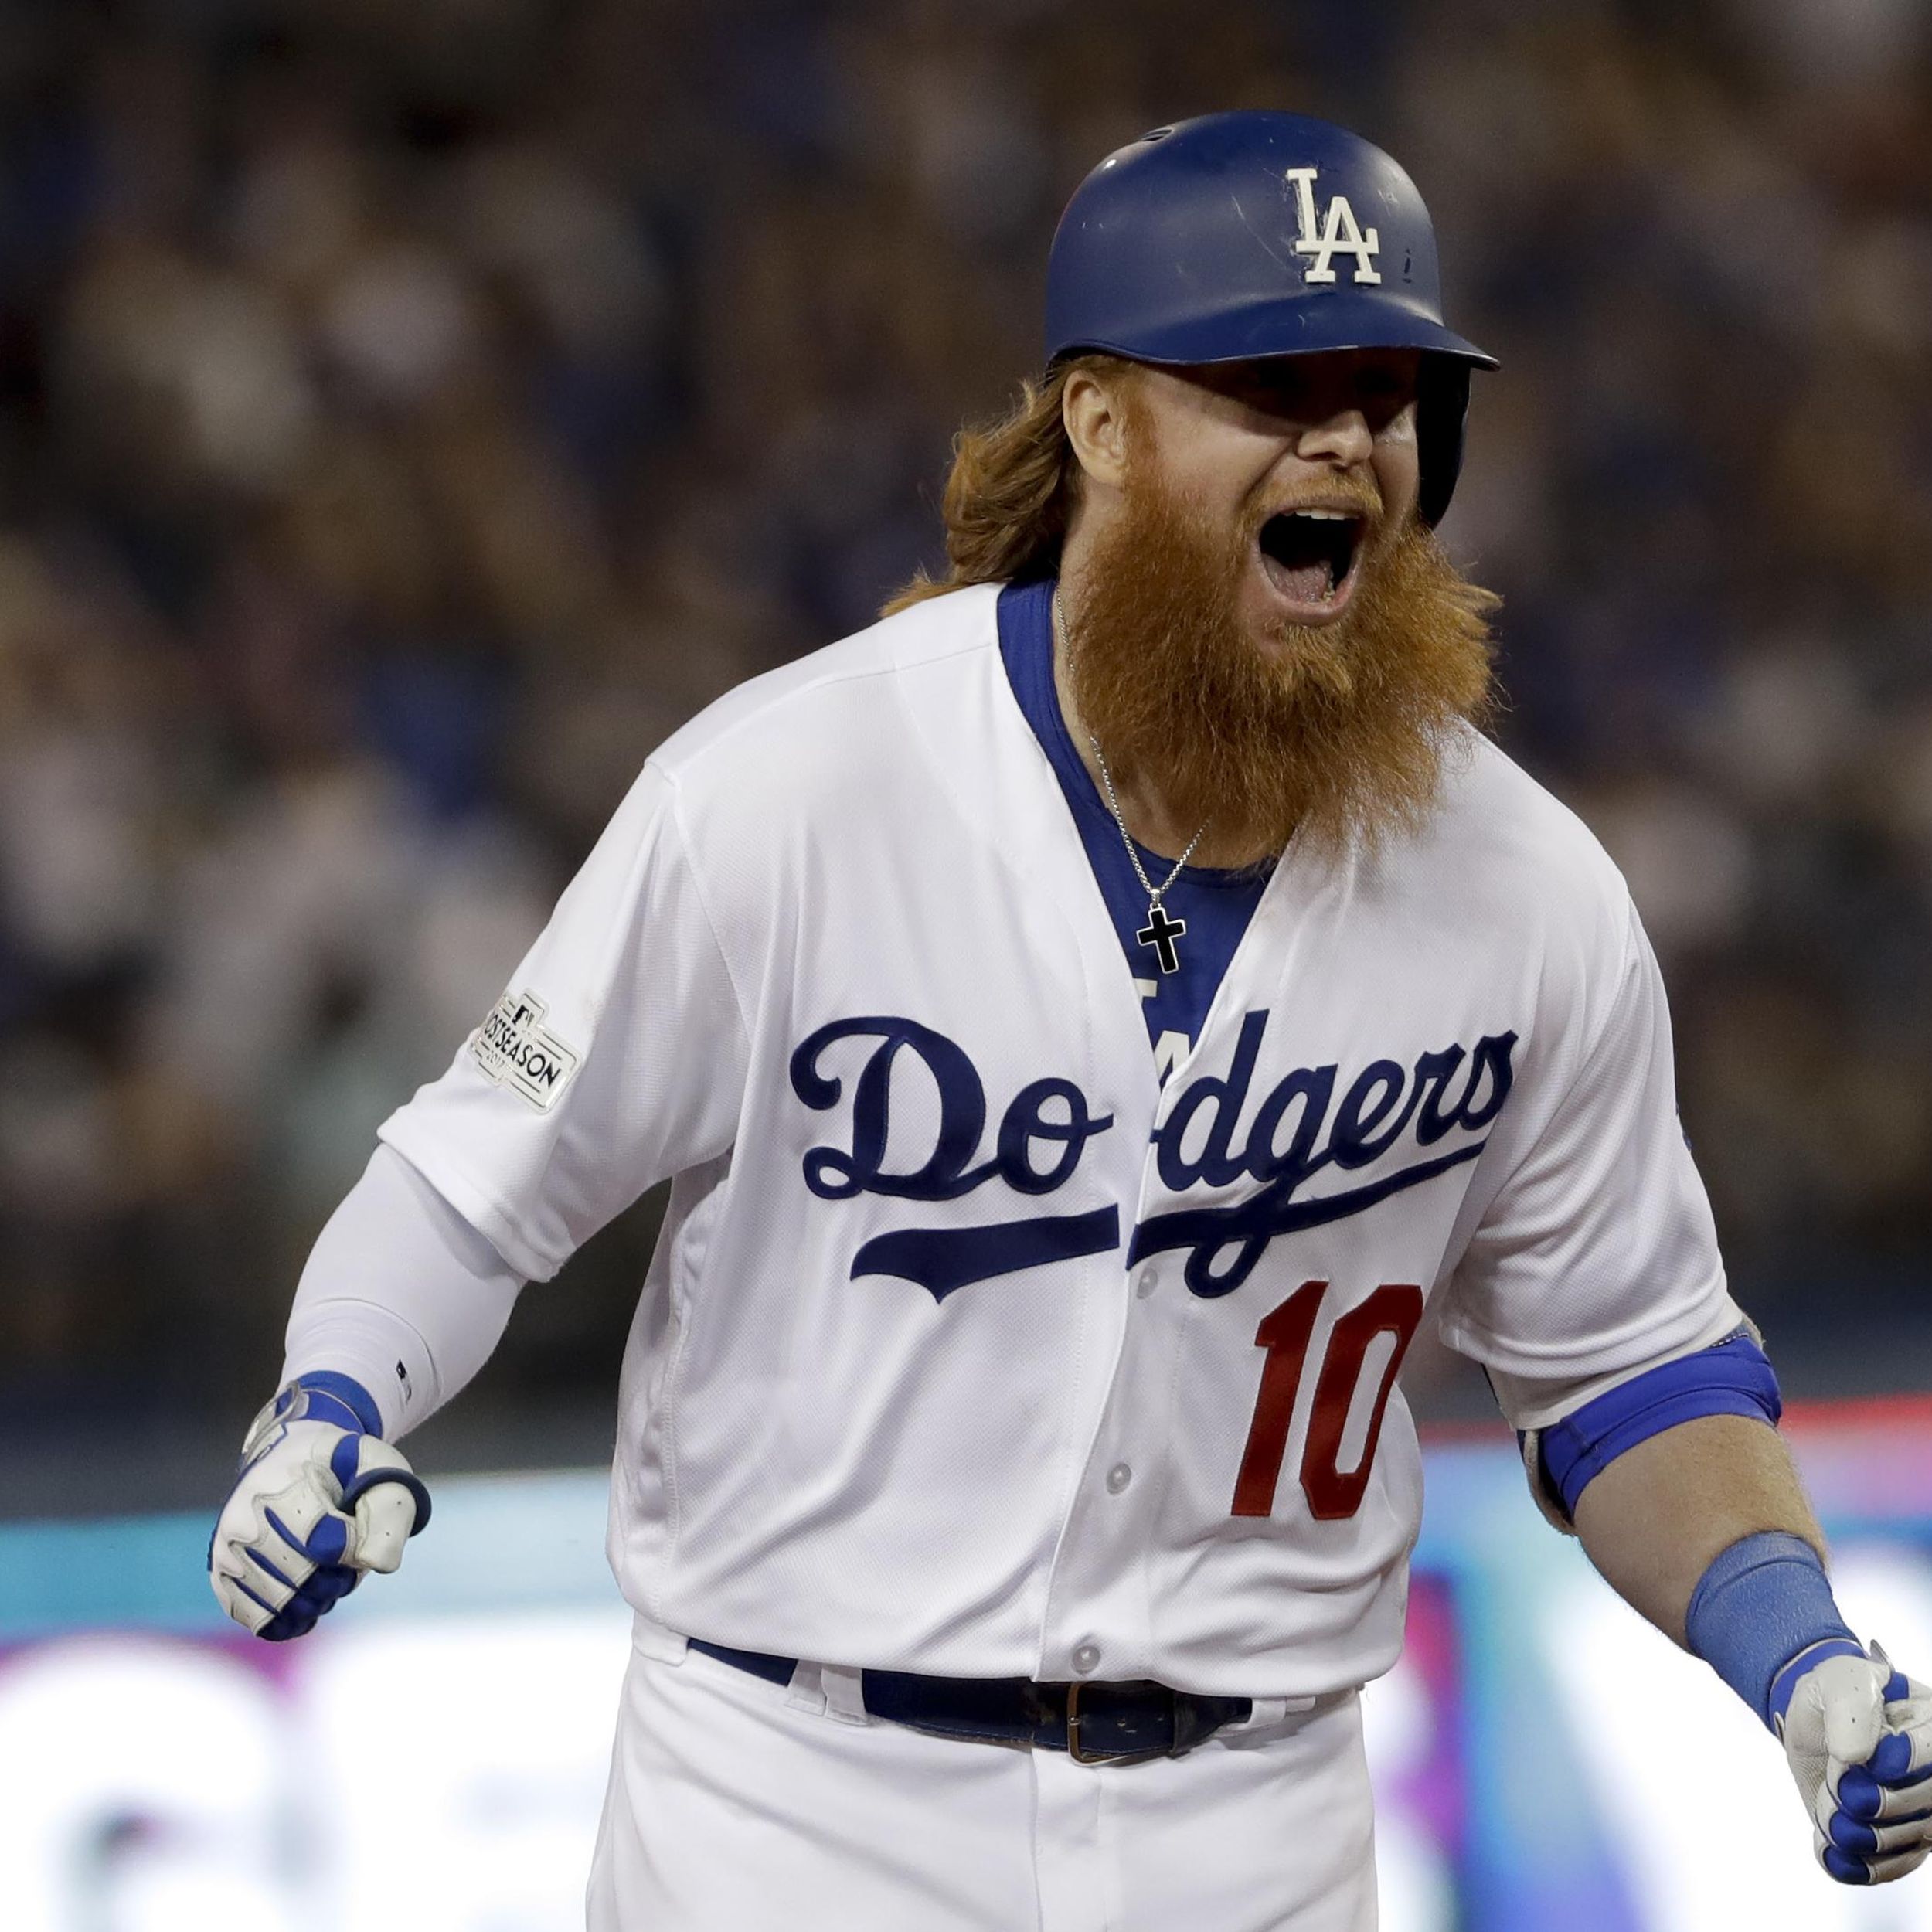 Turner's home run gives Dodgers 2-0 NLCS lead over Cubs